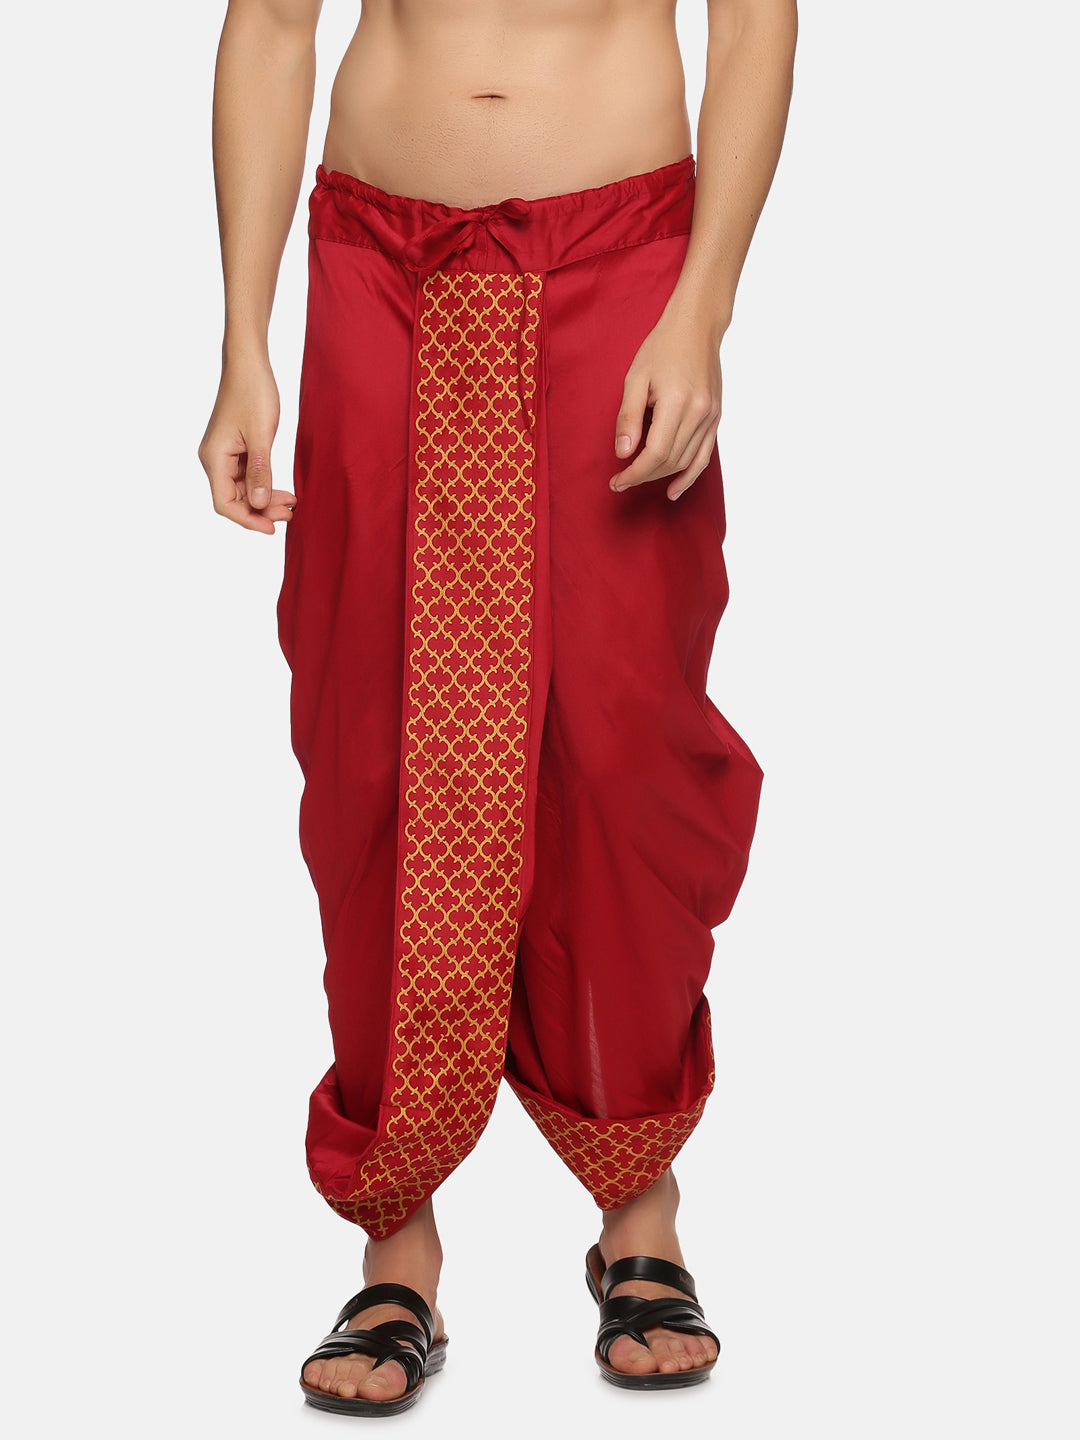 Buy Present Indian Women Dhoti Pants Pleated Harem Patiala Style for Women  India Clothing Free Size (28 Till 34) Printed Dhoti Green Color at Amazon.in